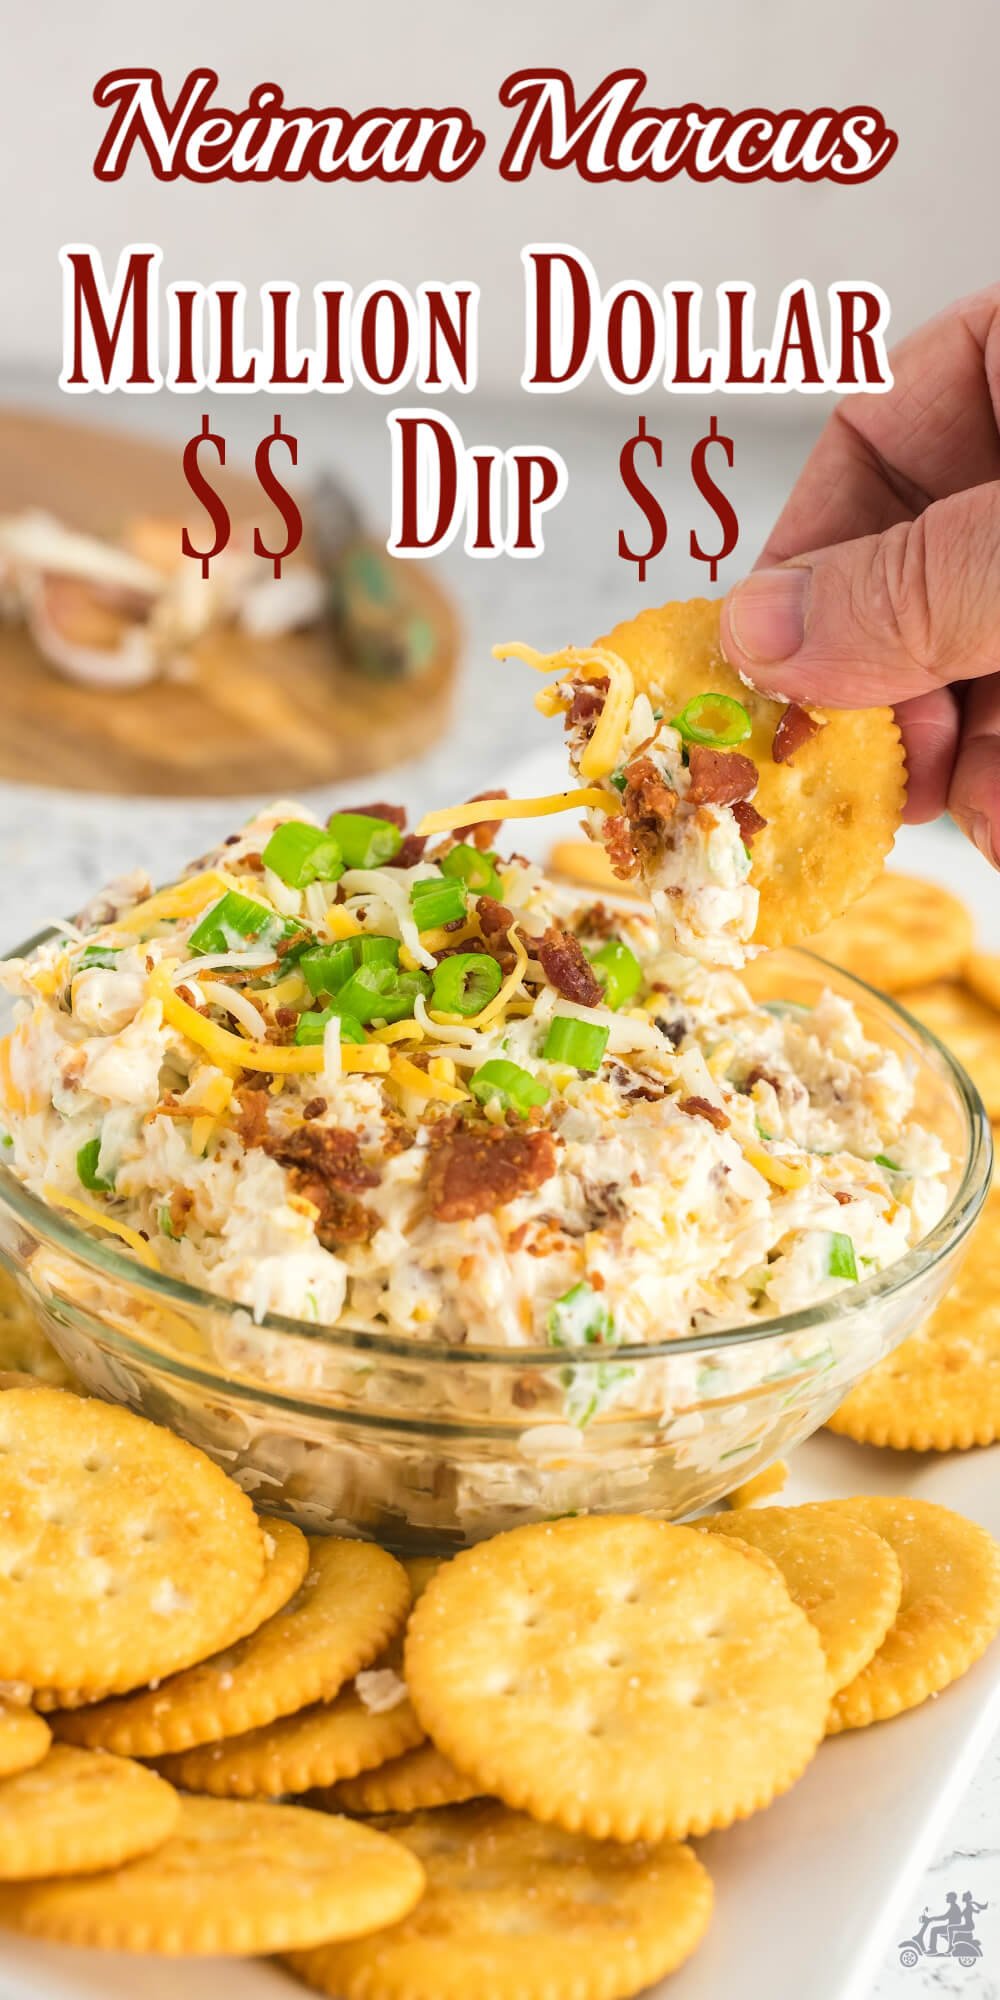 This Million Dollar dip aka the Neiman Marcus dip is ridiculously easy to make with minimal ingredients and only 5 minutes of your time. It simply delectable with creamy tangy flavor, crispy bacon pieces, and the added crunch thanks to the chopped green onions and sliced almonds if you like nuts - perfect for your next party or whenever the craving hits!